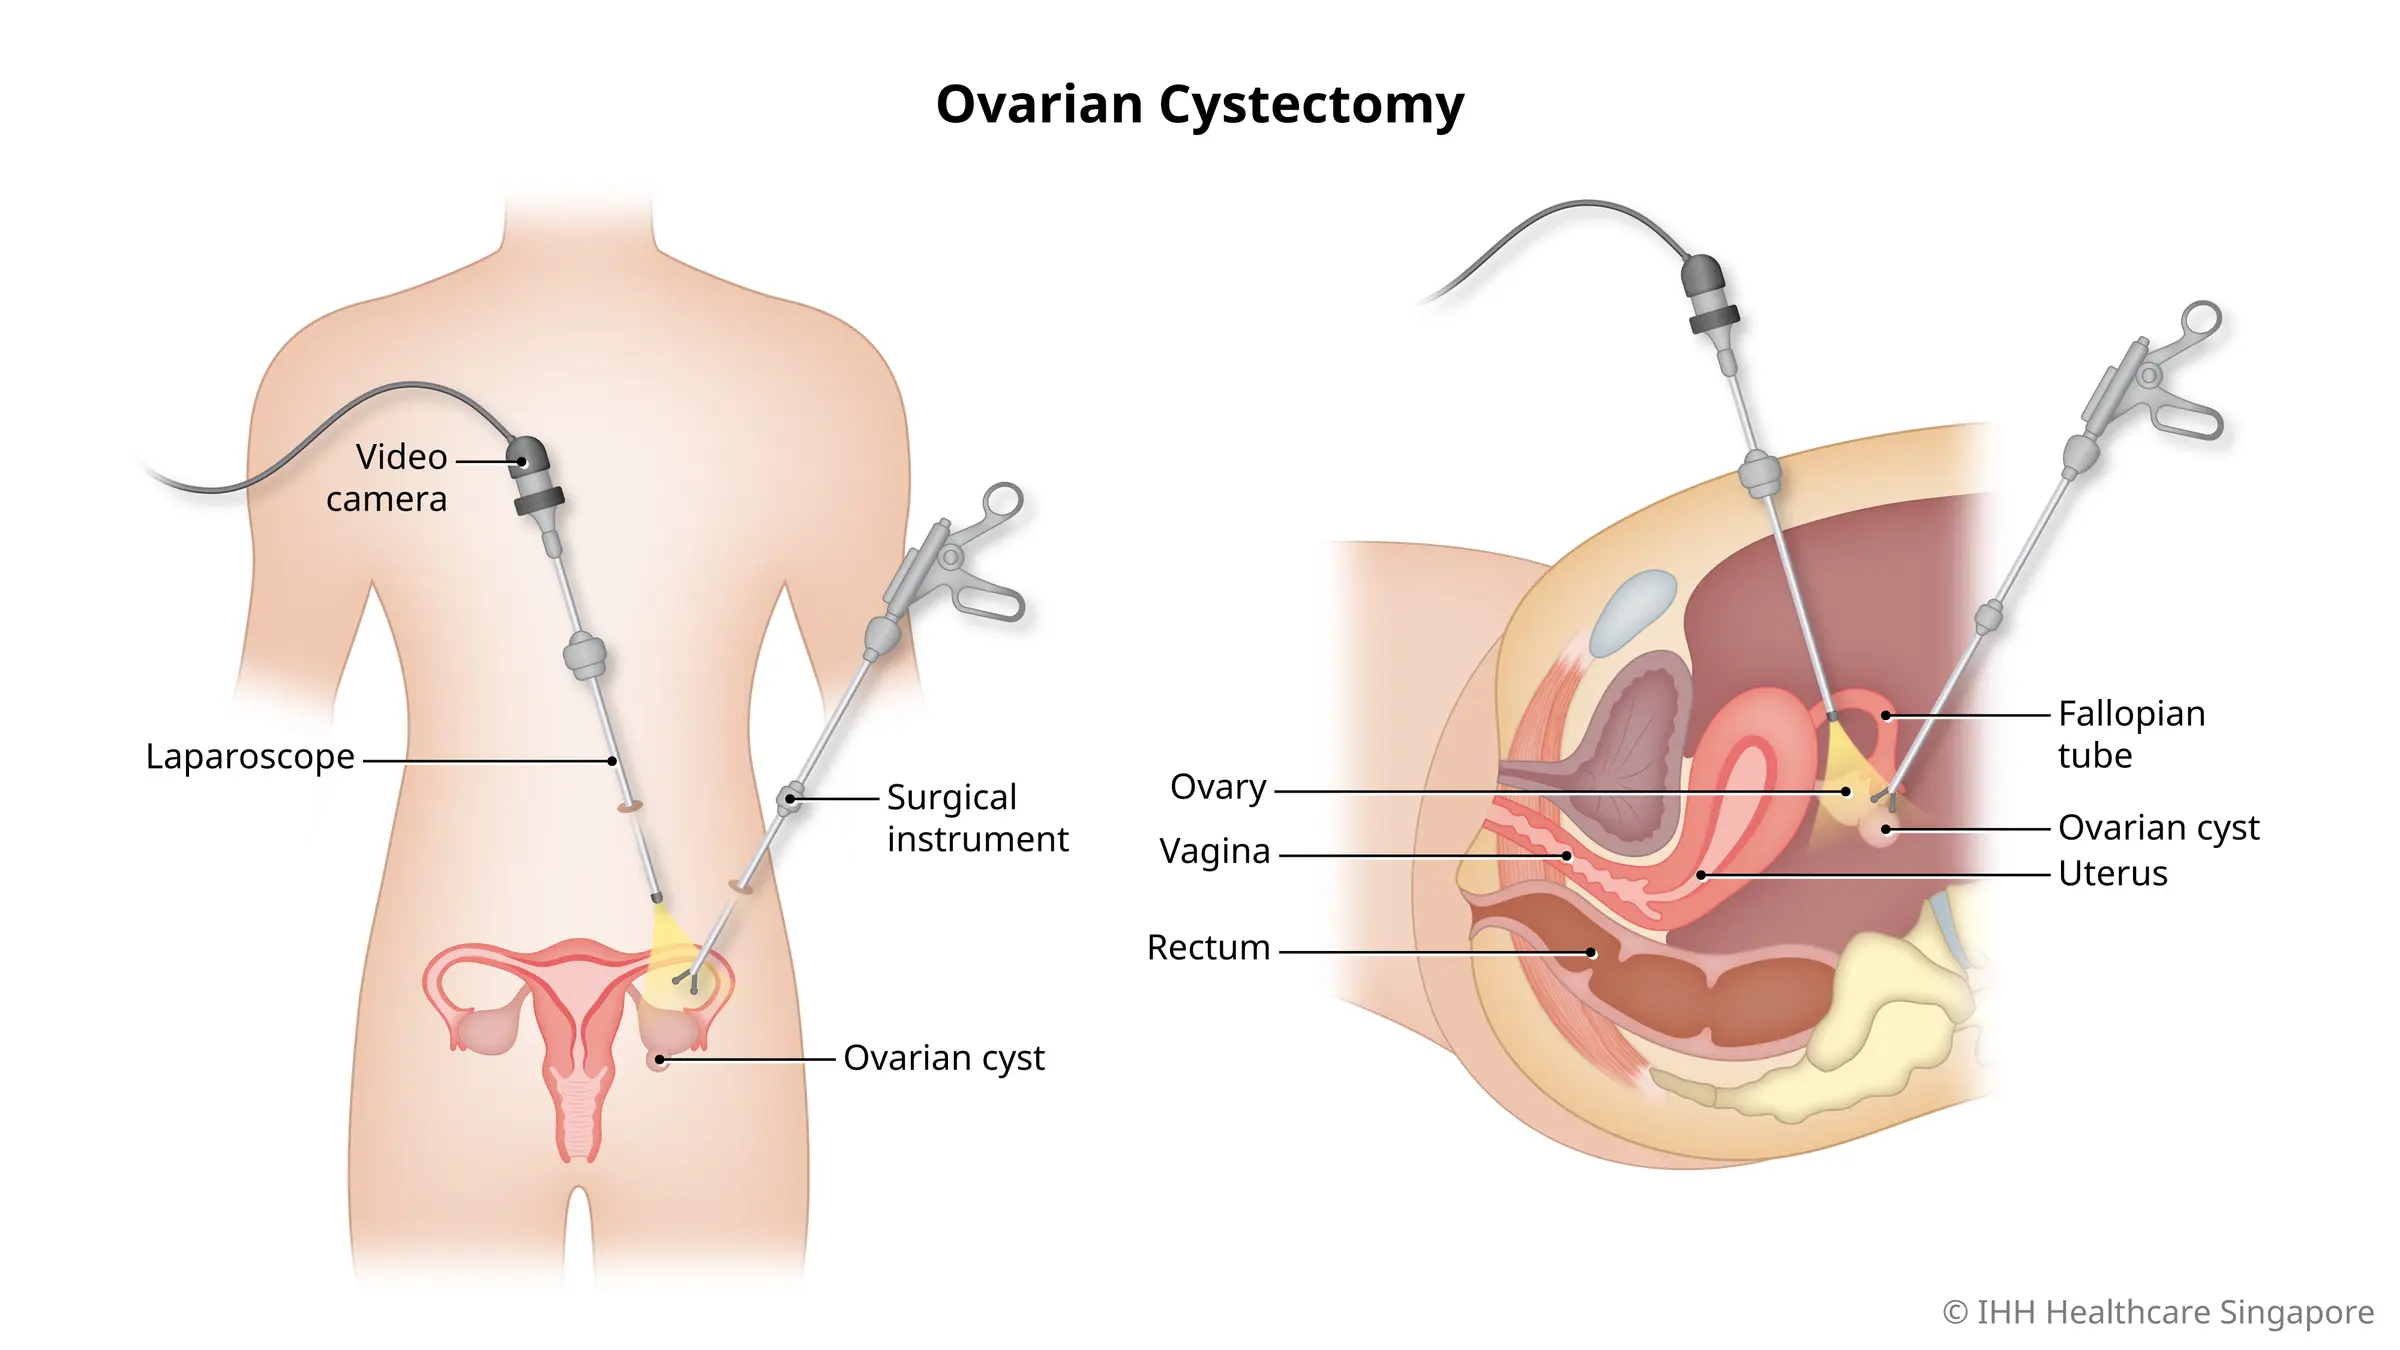 What to expect for a cystectomy?